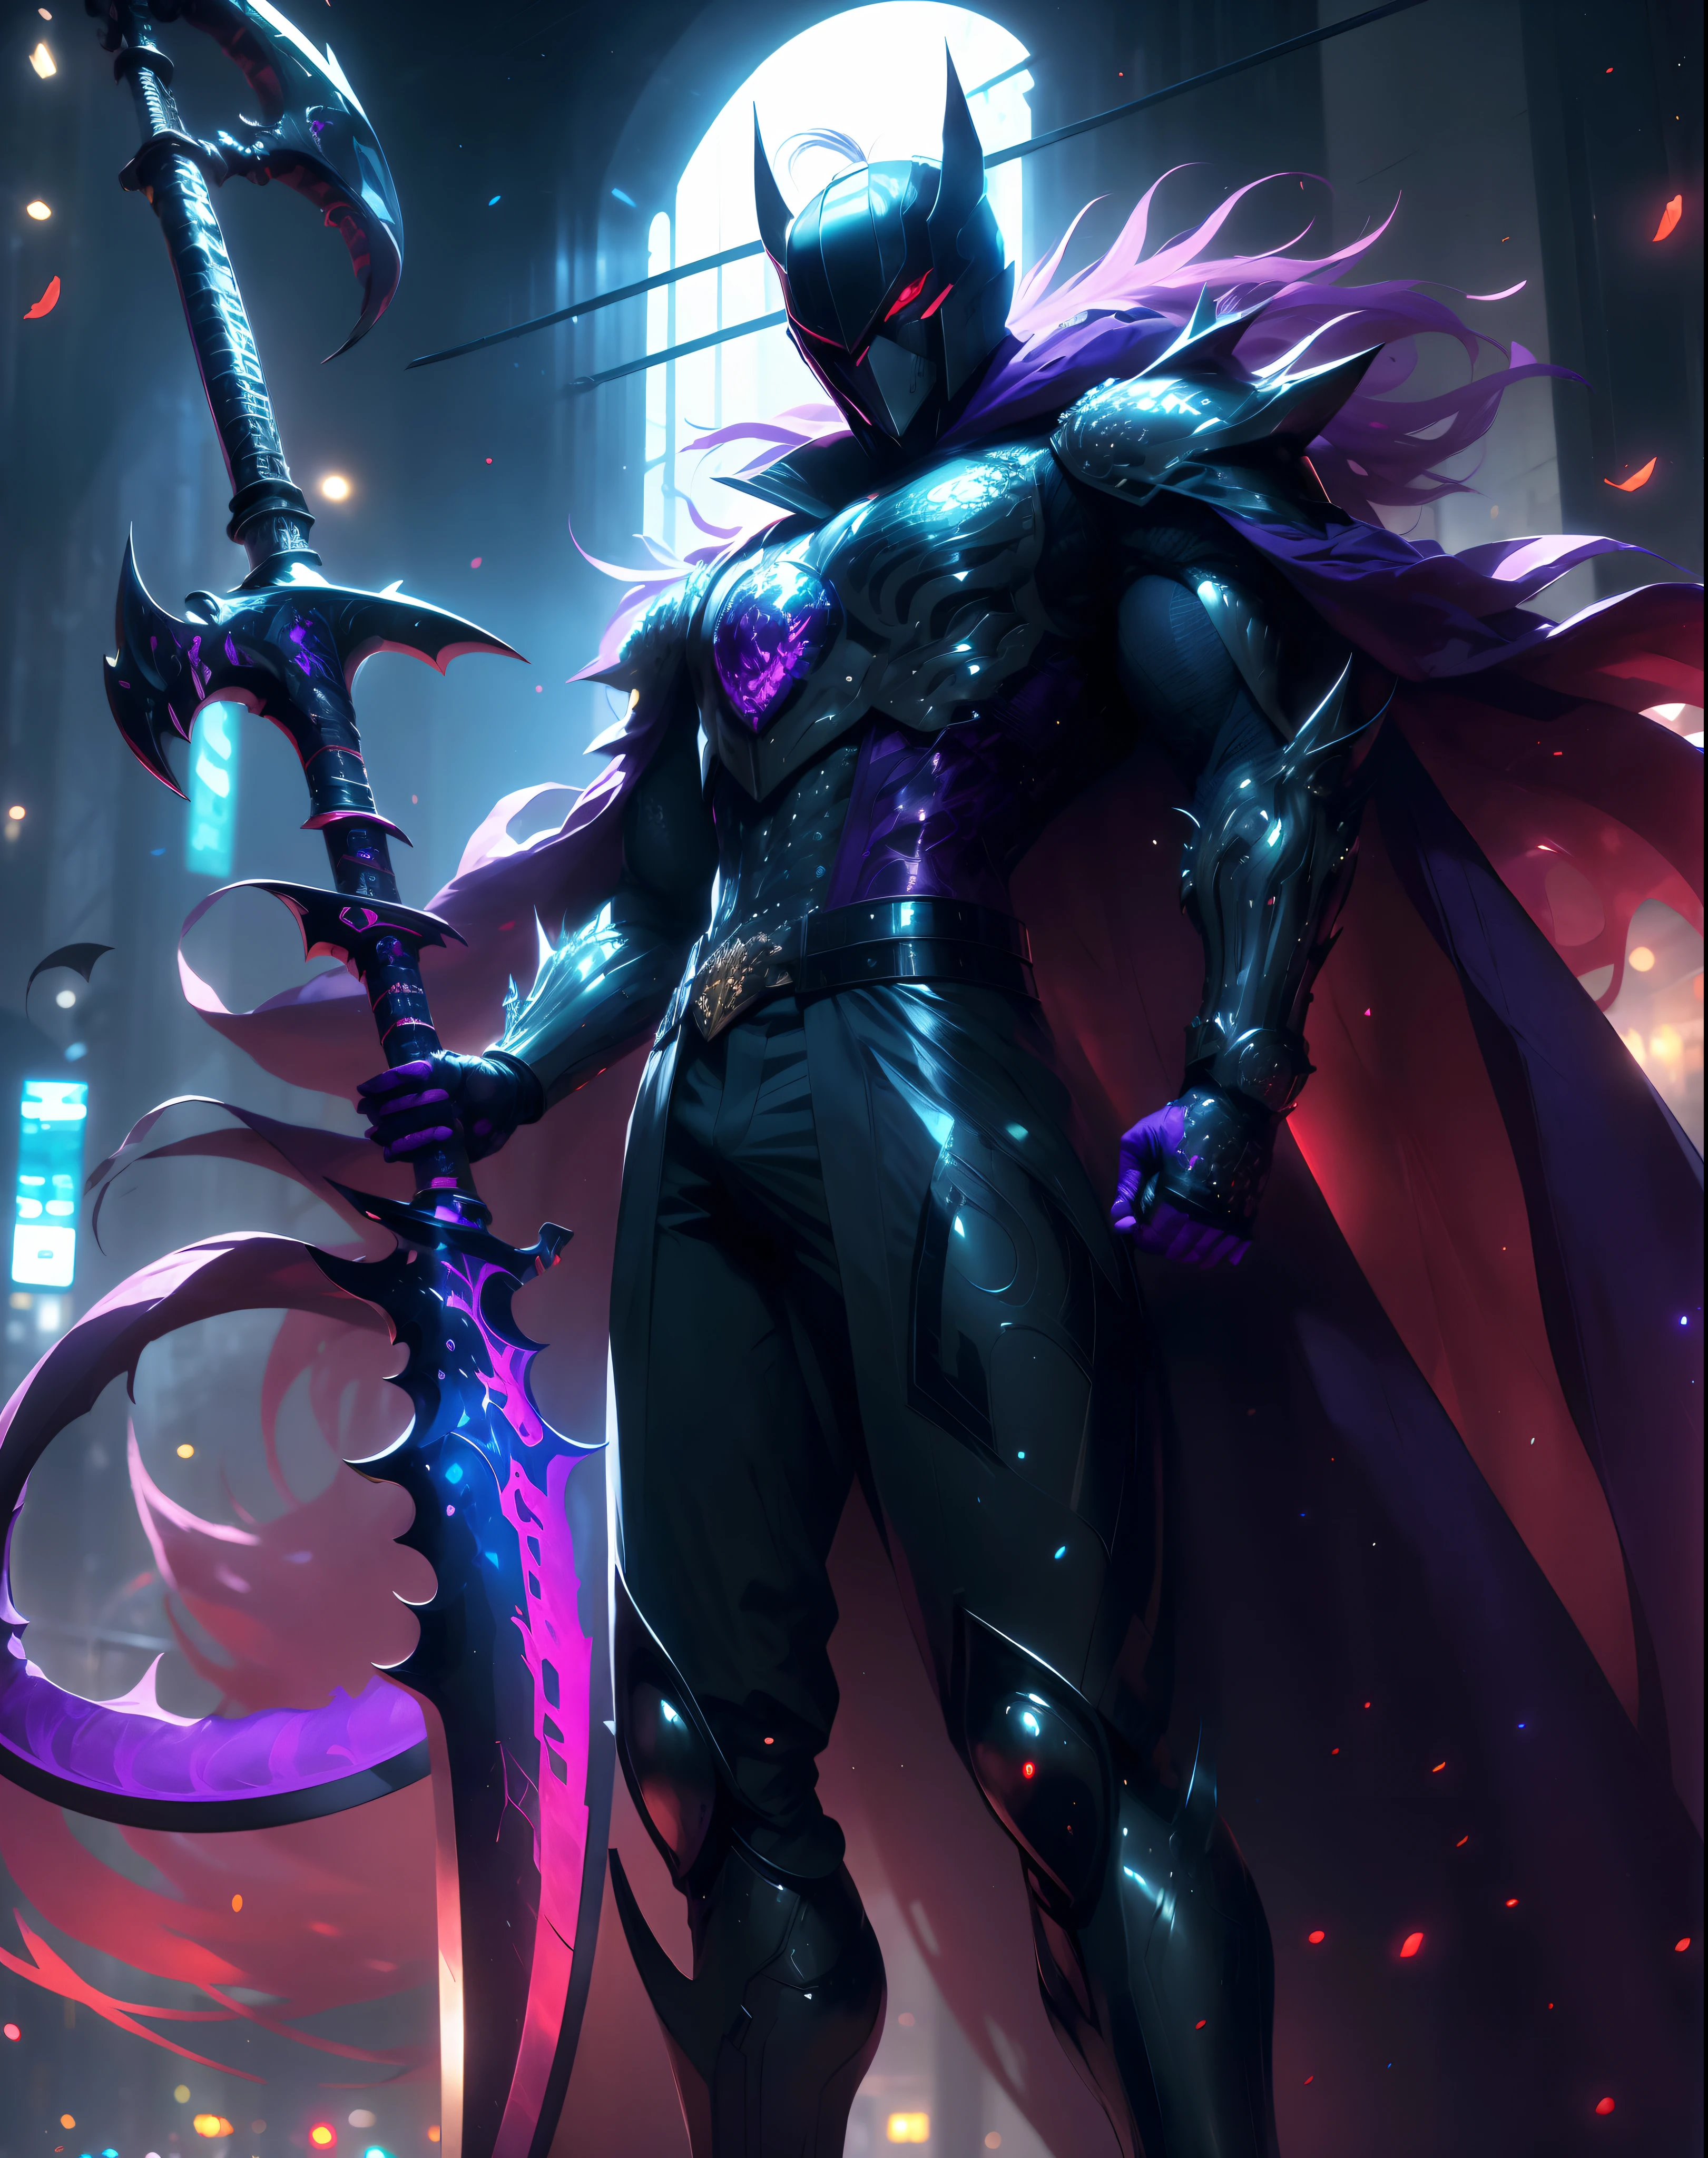 A man in a black suit holding a sword and a purple cape - SeaArt AI